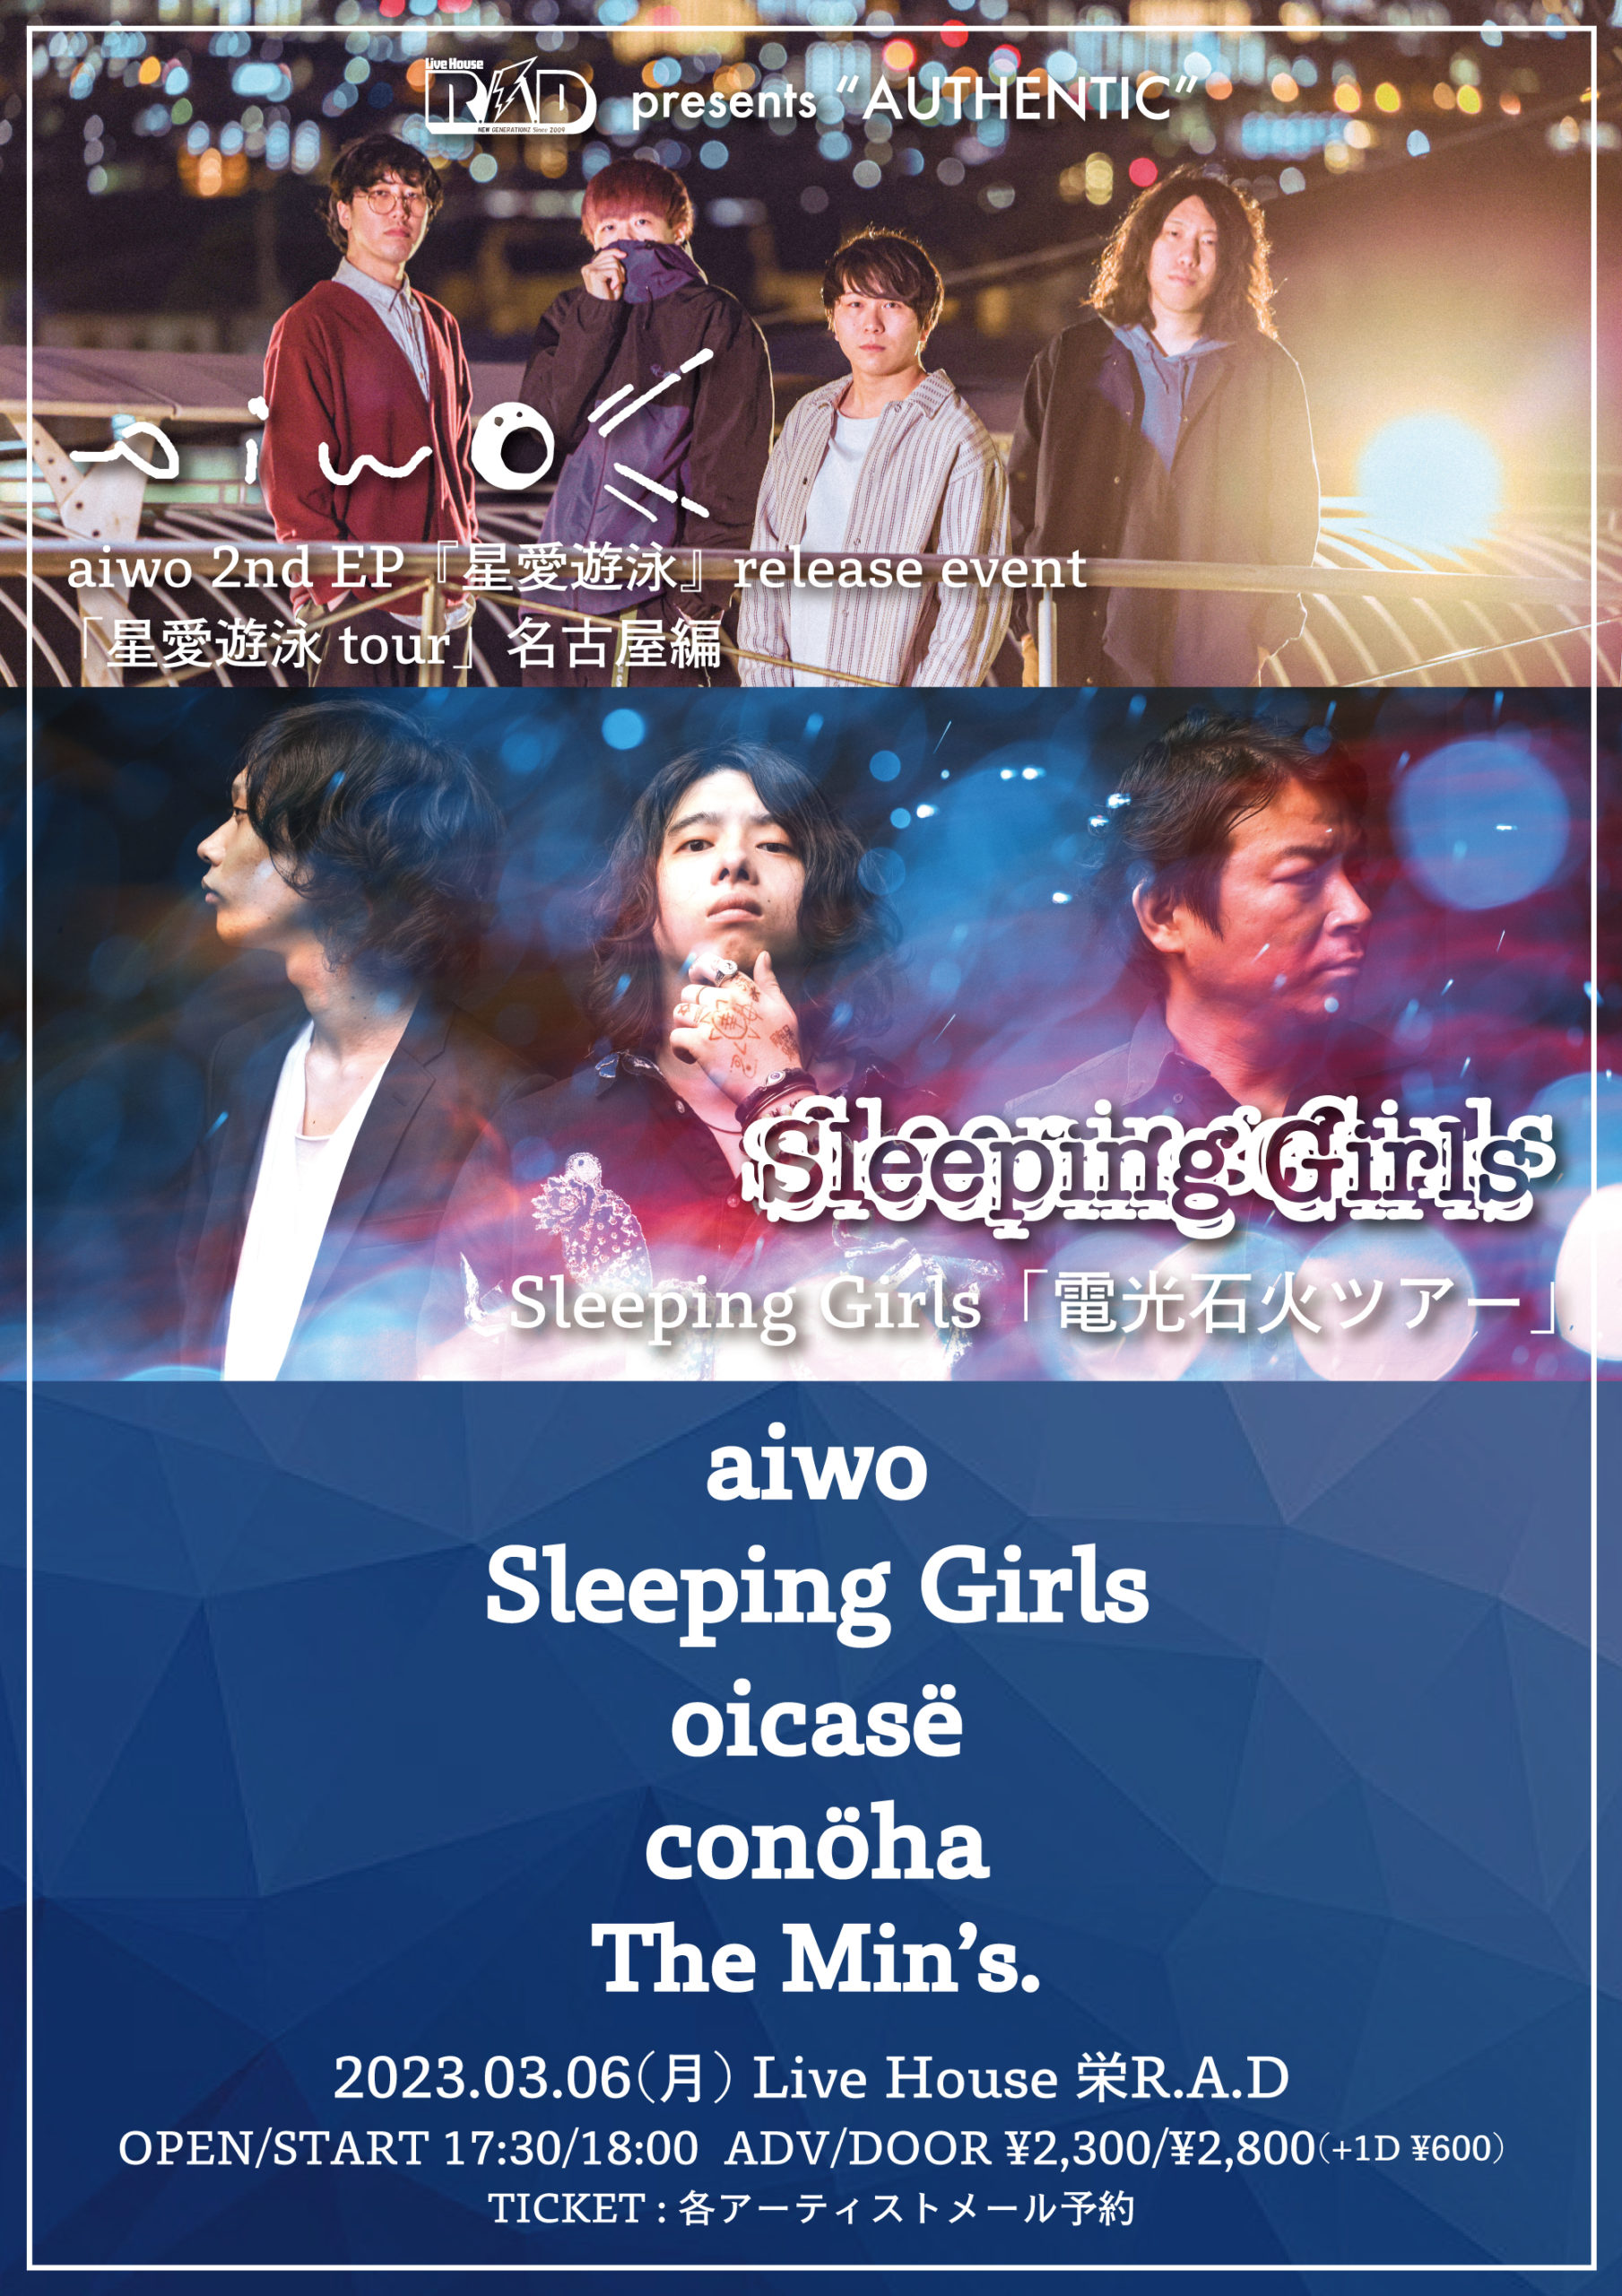 R.A.D presents "AUTHENTIC" aiwo 2nd EP『星愛遊泳』release event 「星愛遊泳 tour」名古屋編 Sleeping Girls「電光石火ツアー」